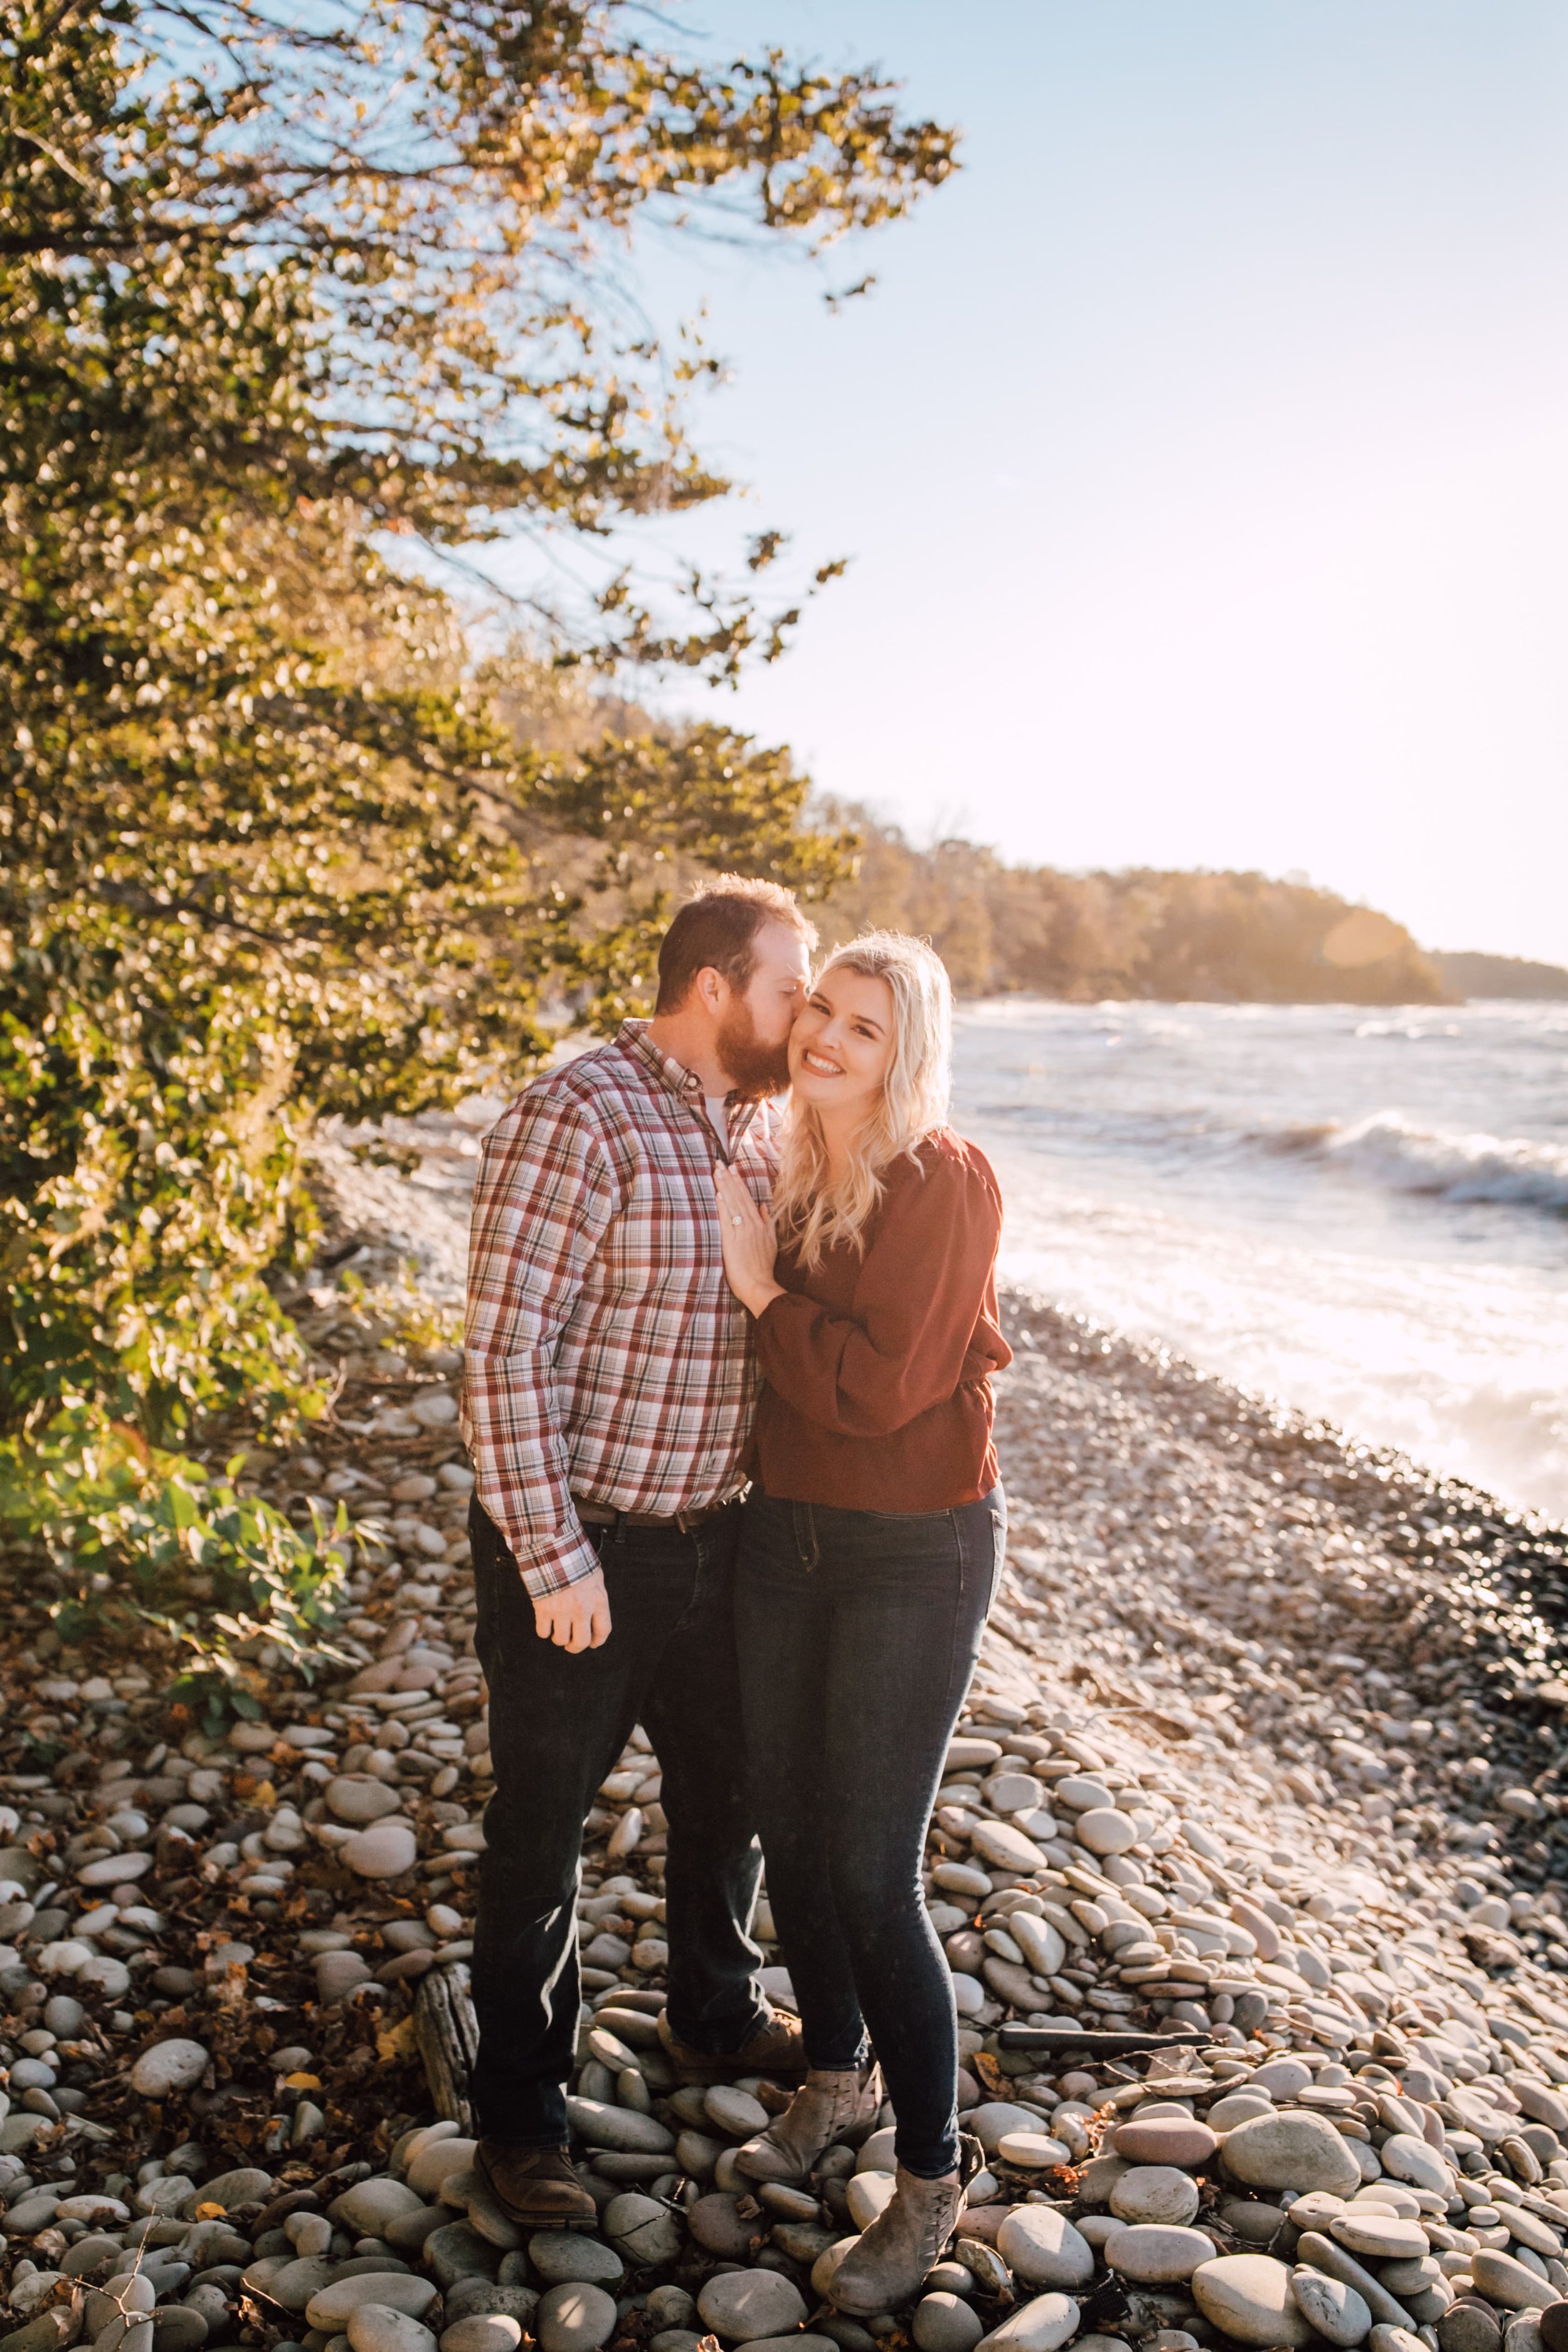  anthony kisses danielle’s cheek as they stand on a rocky beach in front of a great lake for their sunset engagement photos 